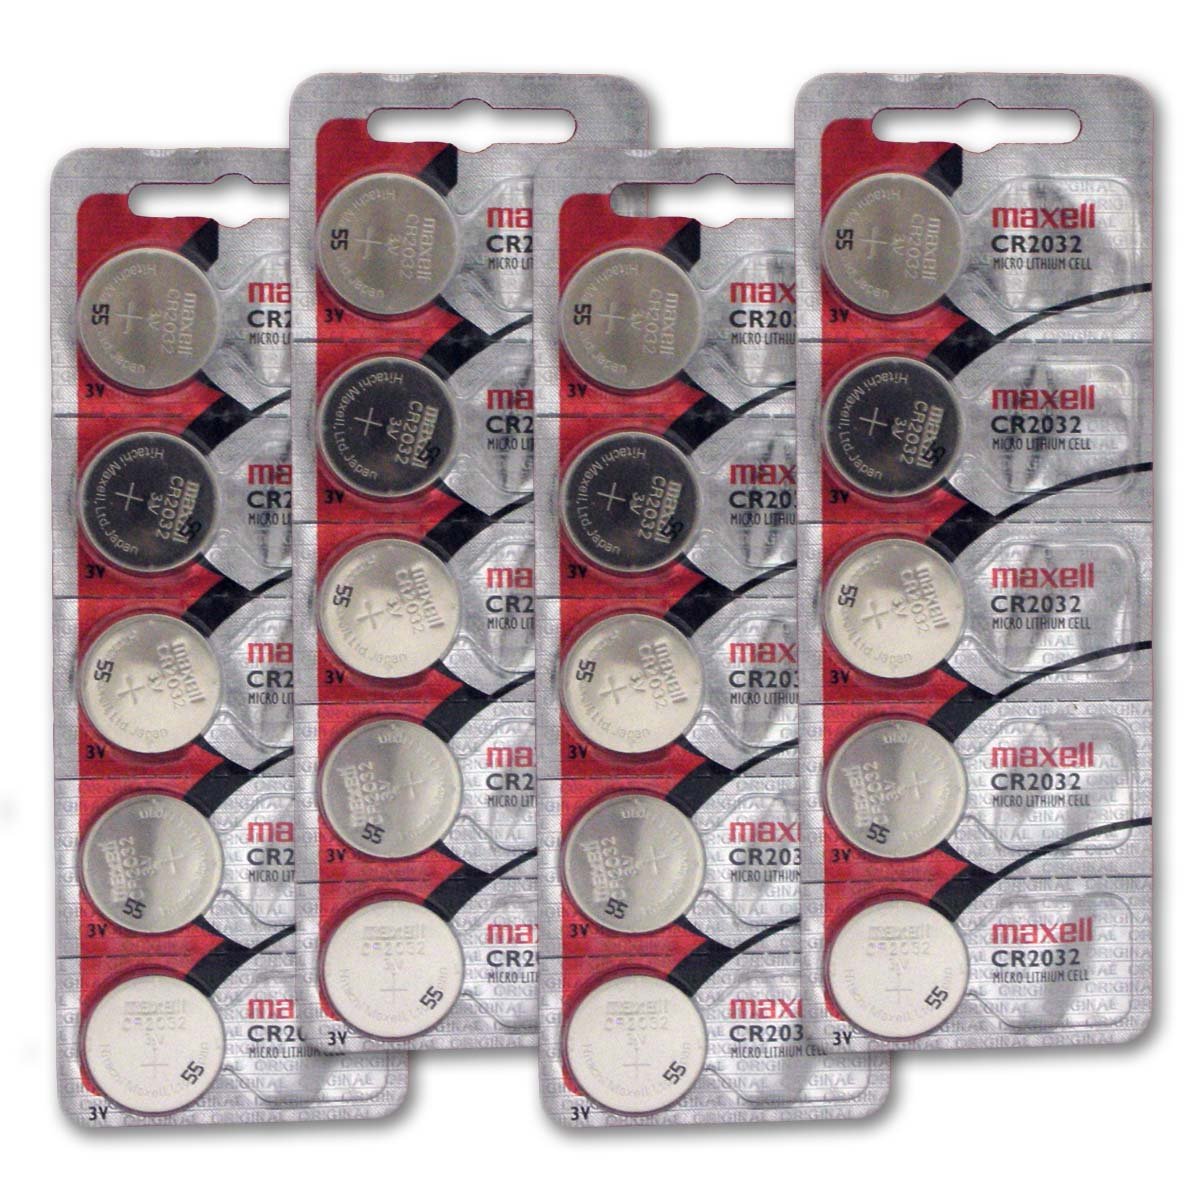 CR2032 3V Micro Lithium coin Cell Battery Maxell Original Hologram pack CR-2032 - 20 Pack